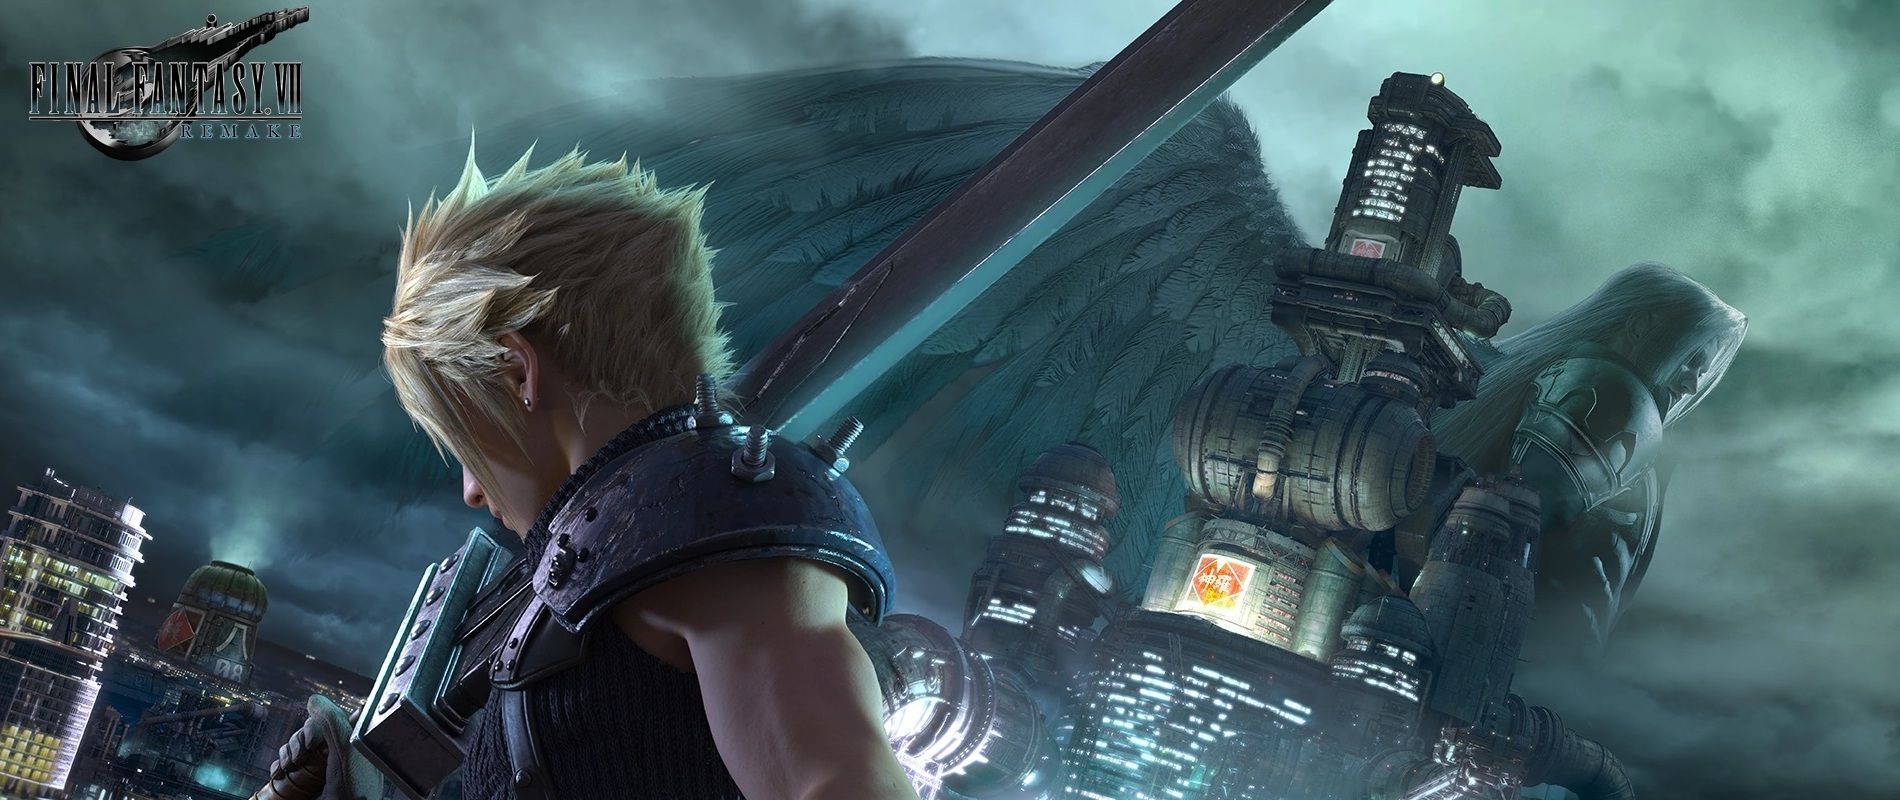 Cloud and Sephiroth in the Final Fantasy 7 Remake.